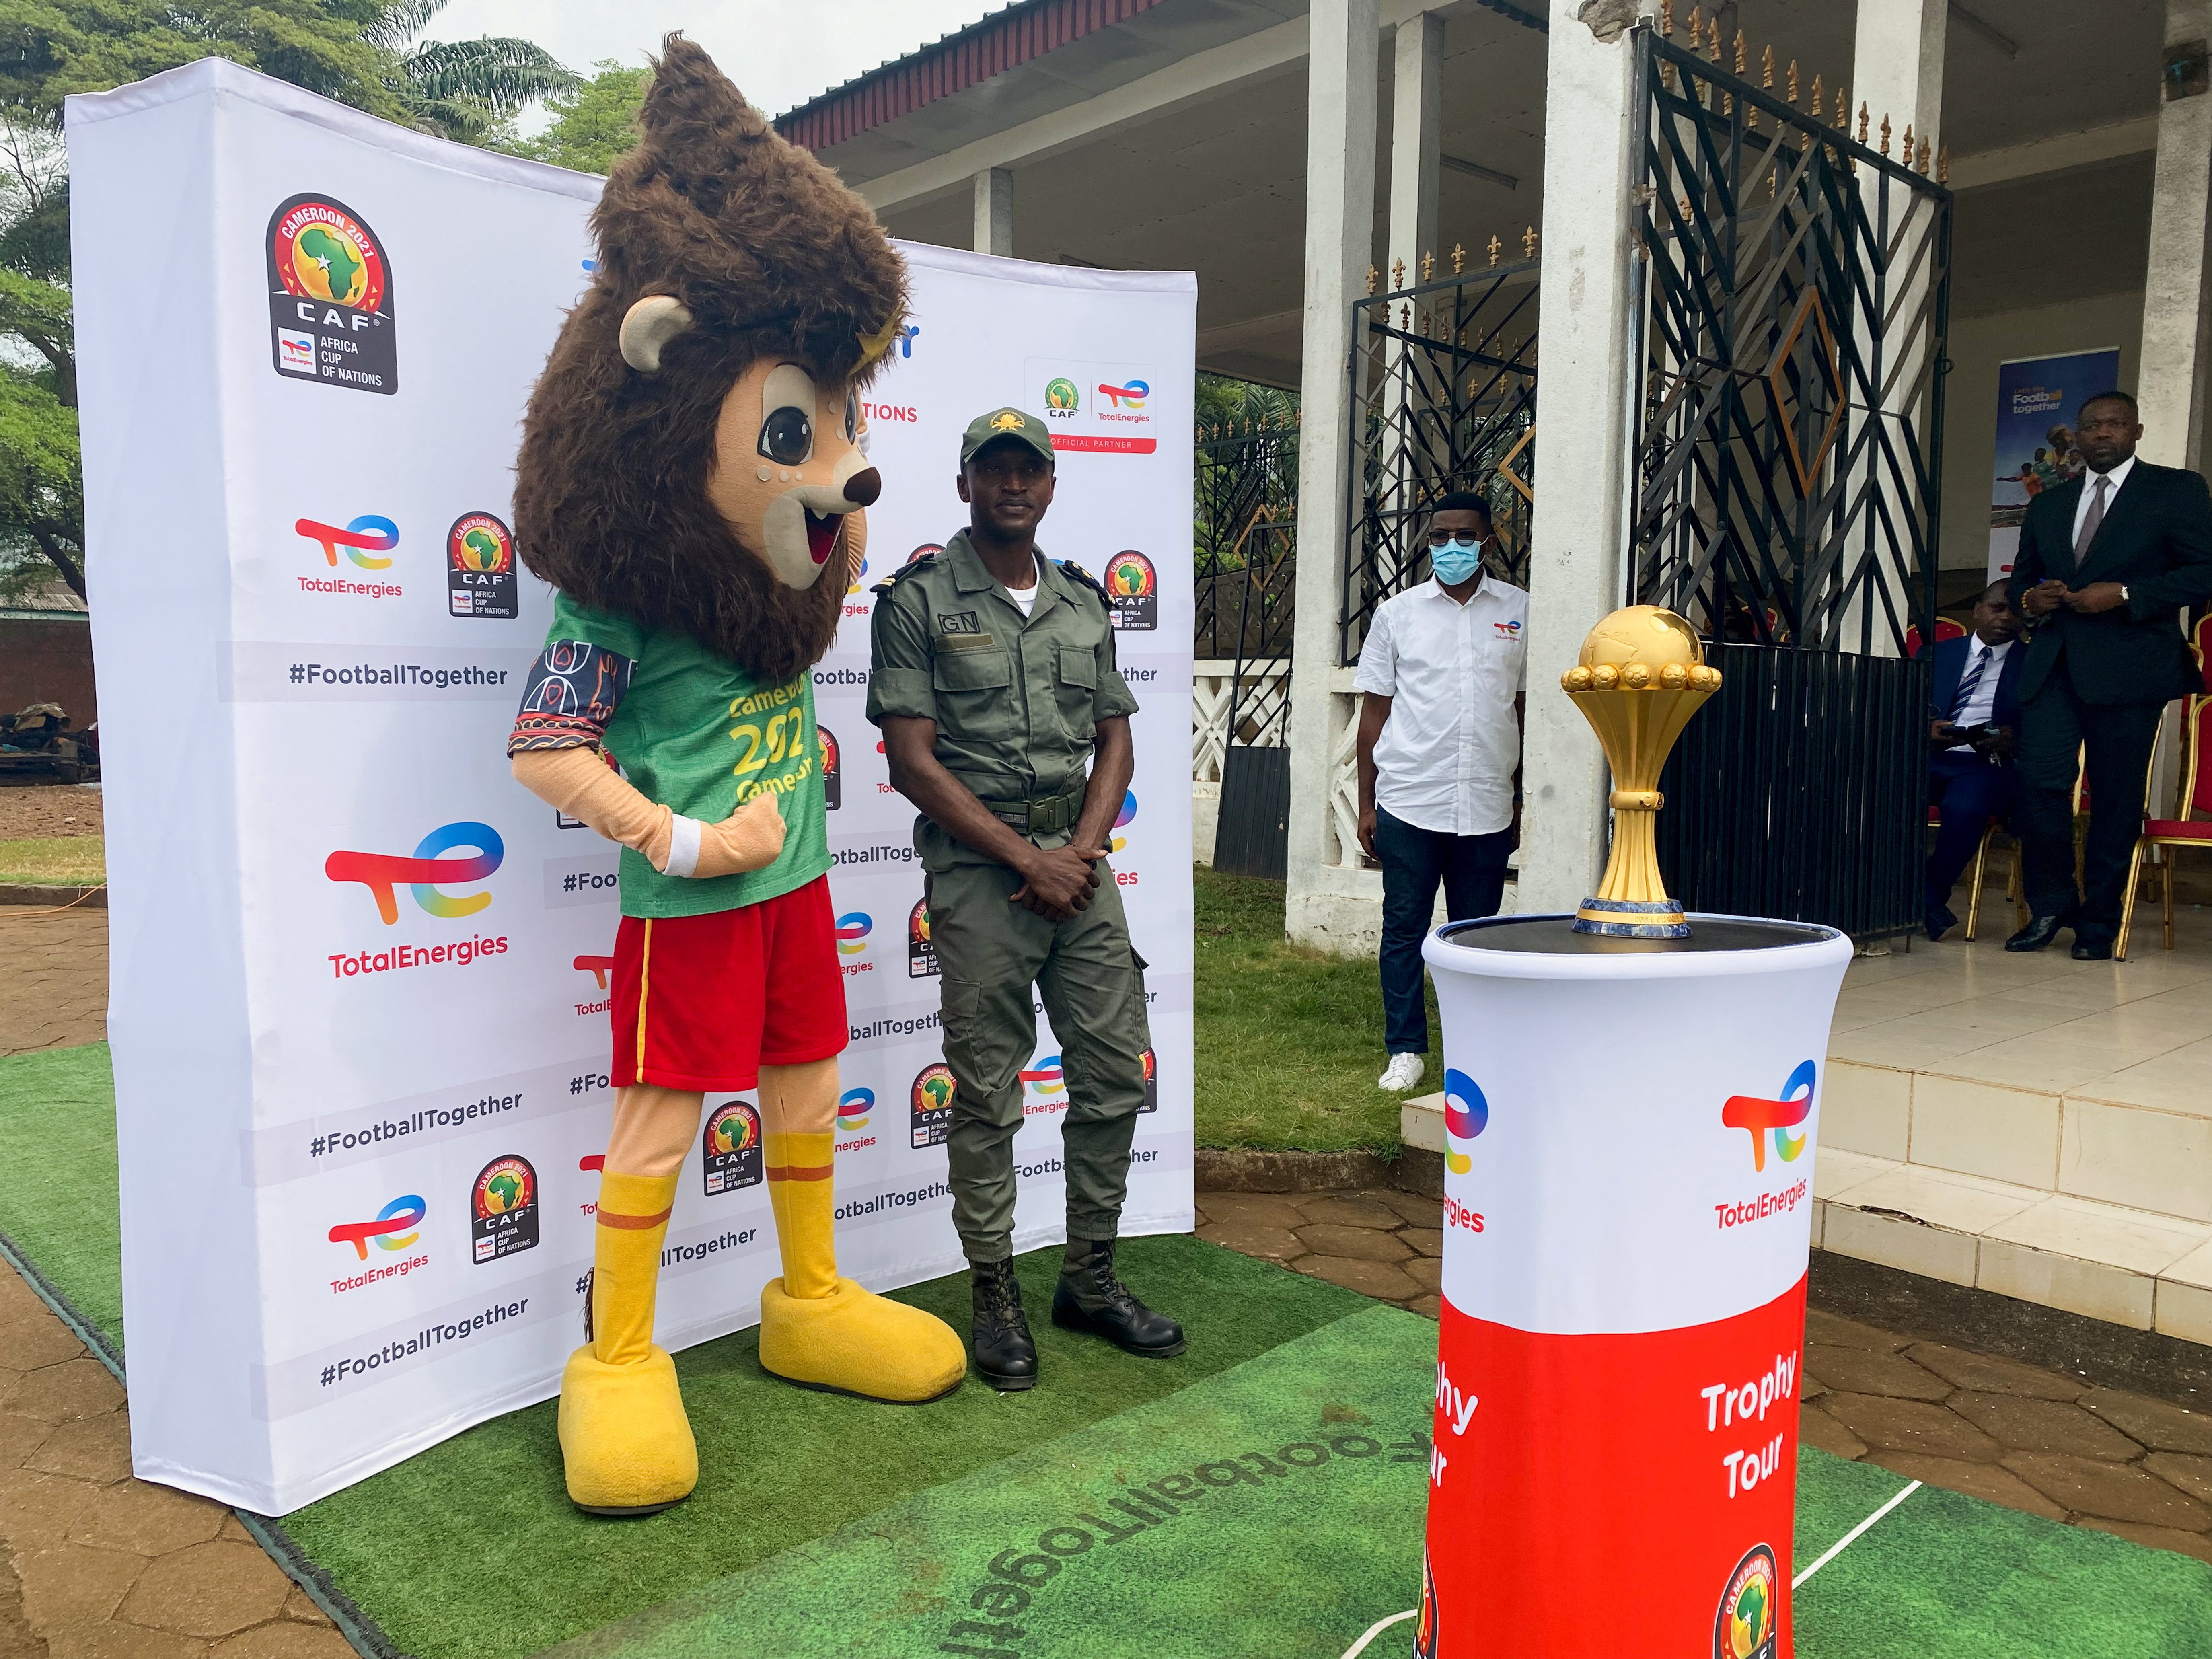 A soldier with the Africa Cup of Nations mascot in Limbe, Cameroon